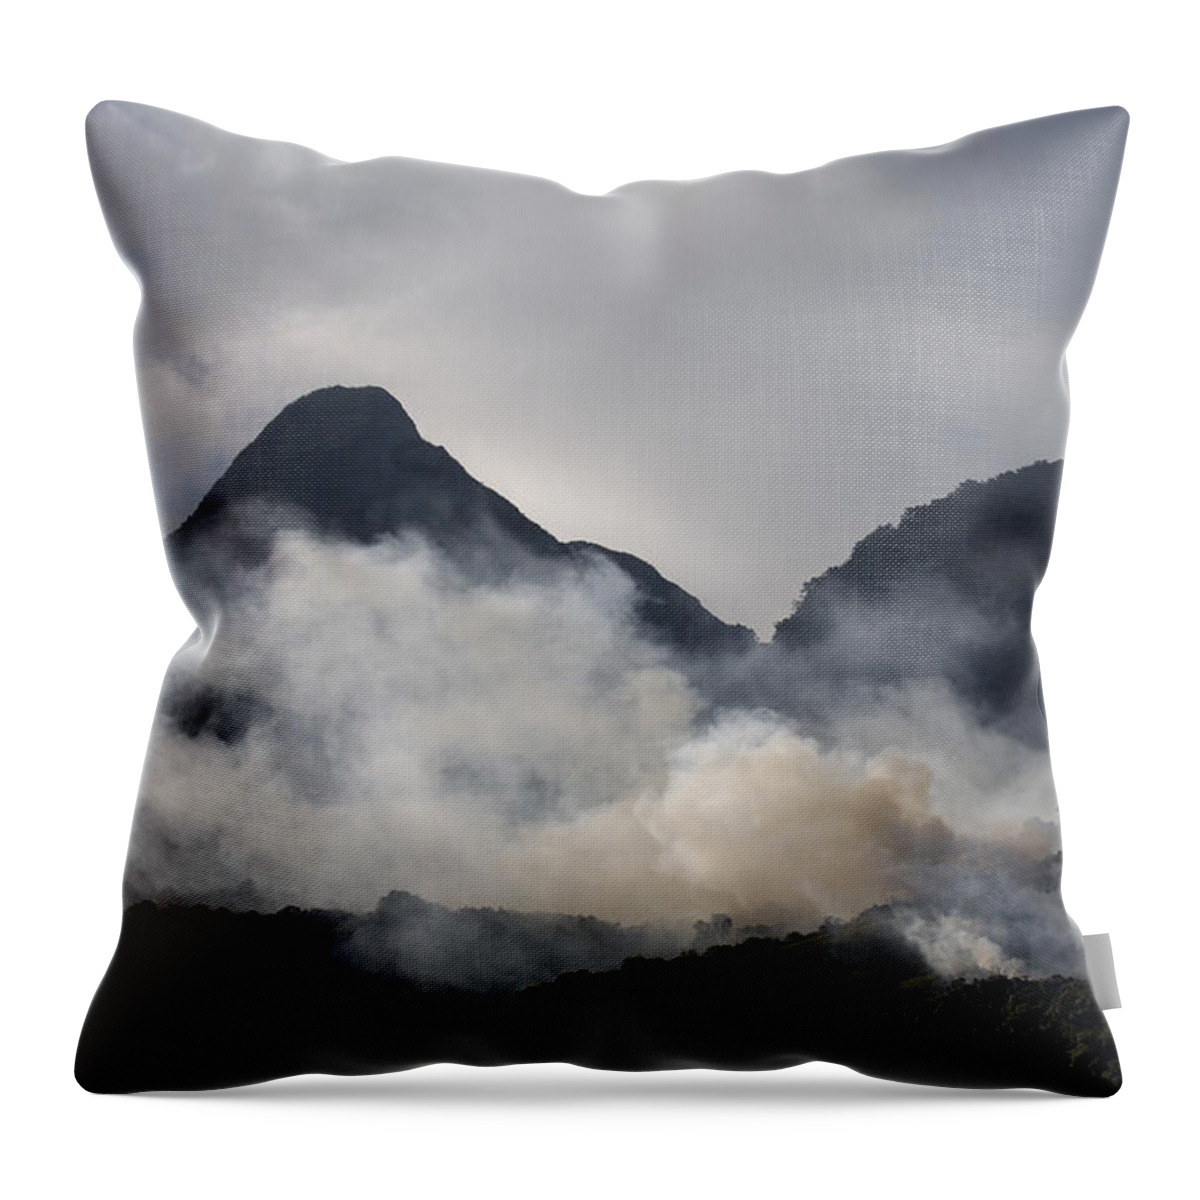 Feb0514 Throw Pillow featuring the photograph Fire Used To Herd Cattle Andes Mts by Pete Oxford